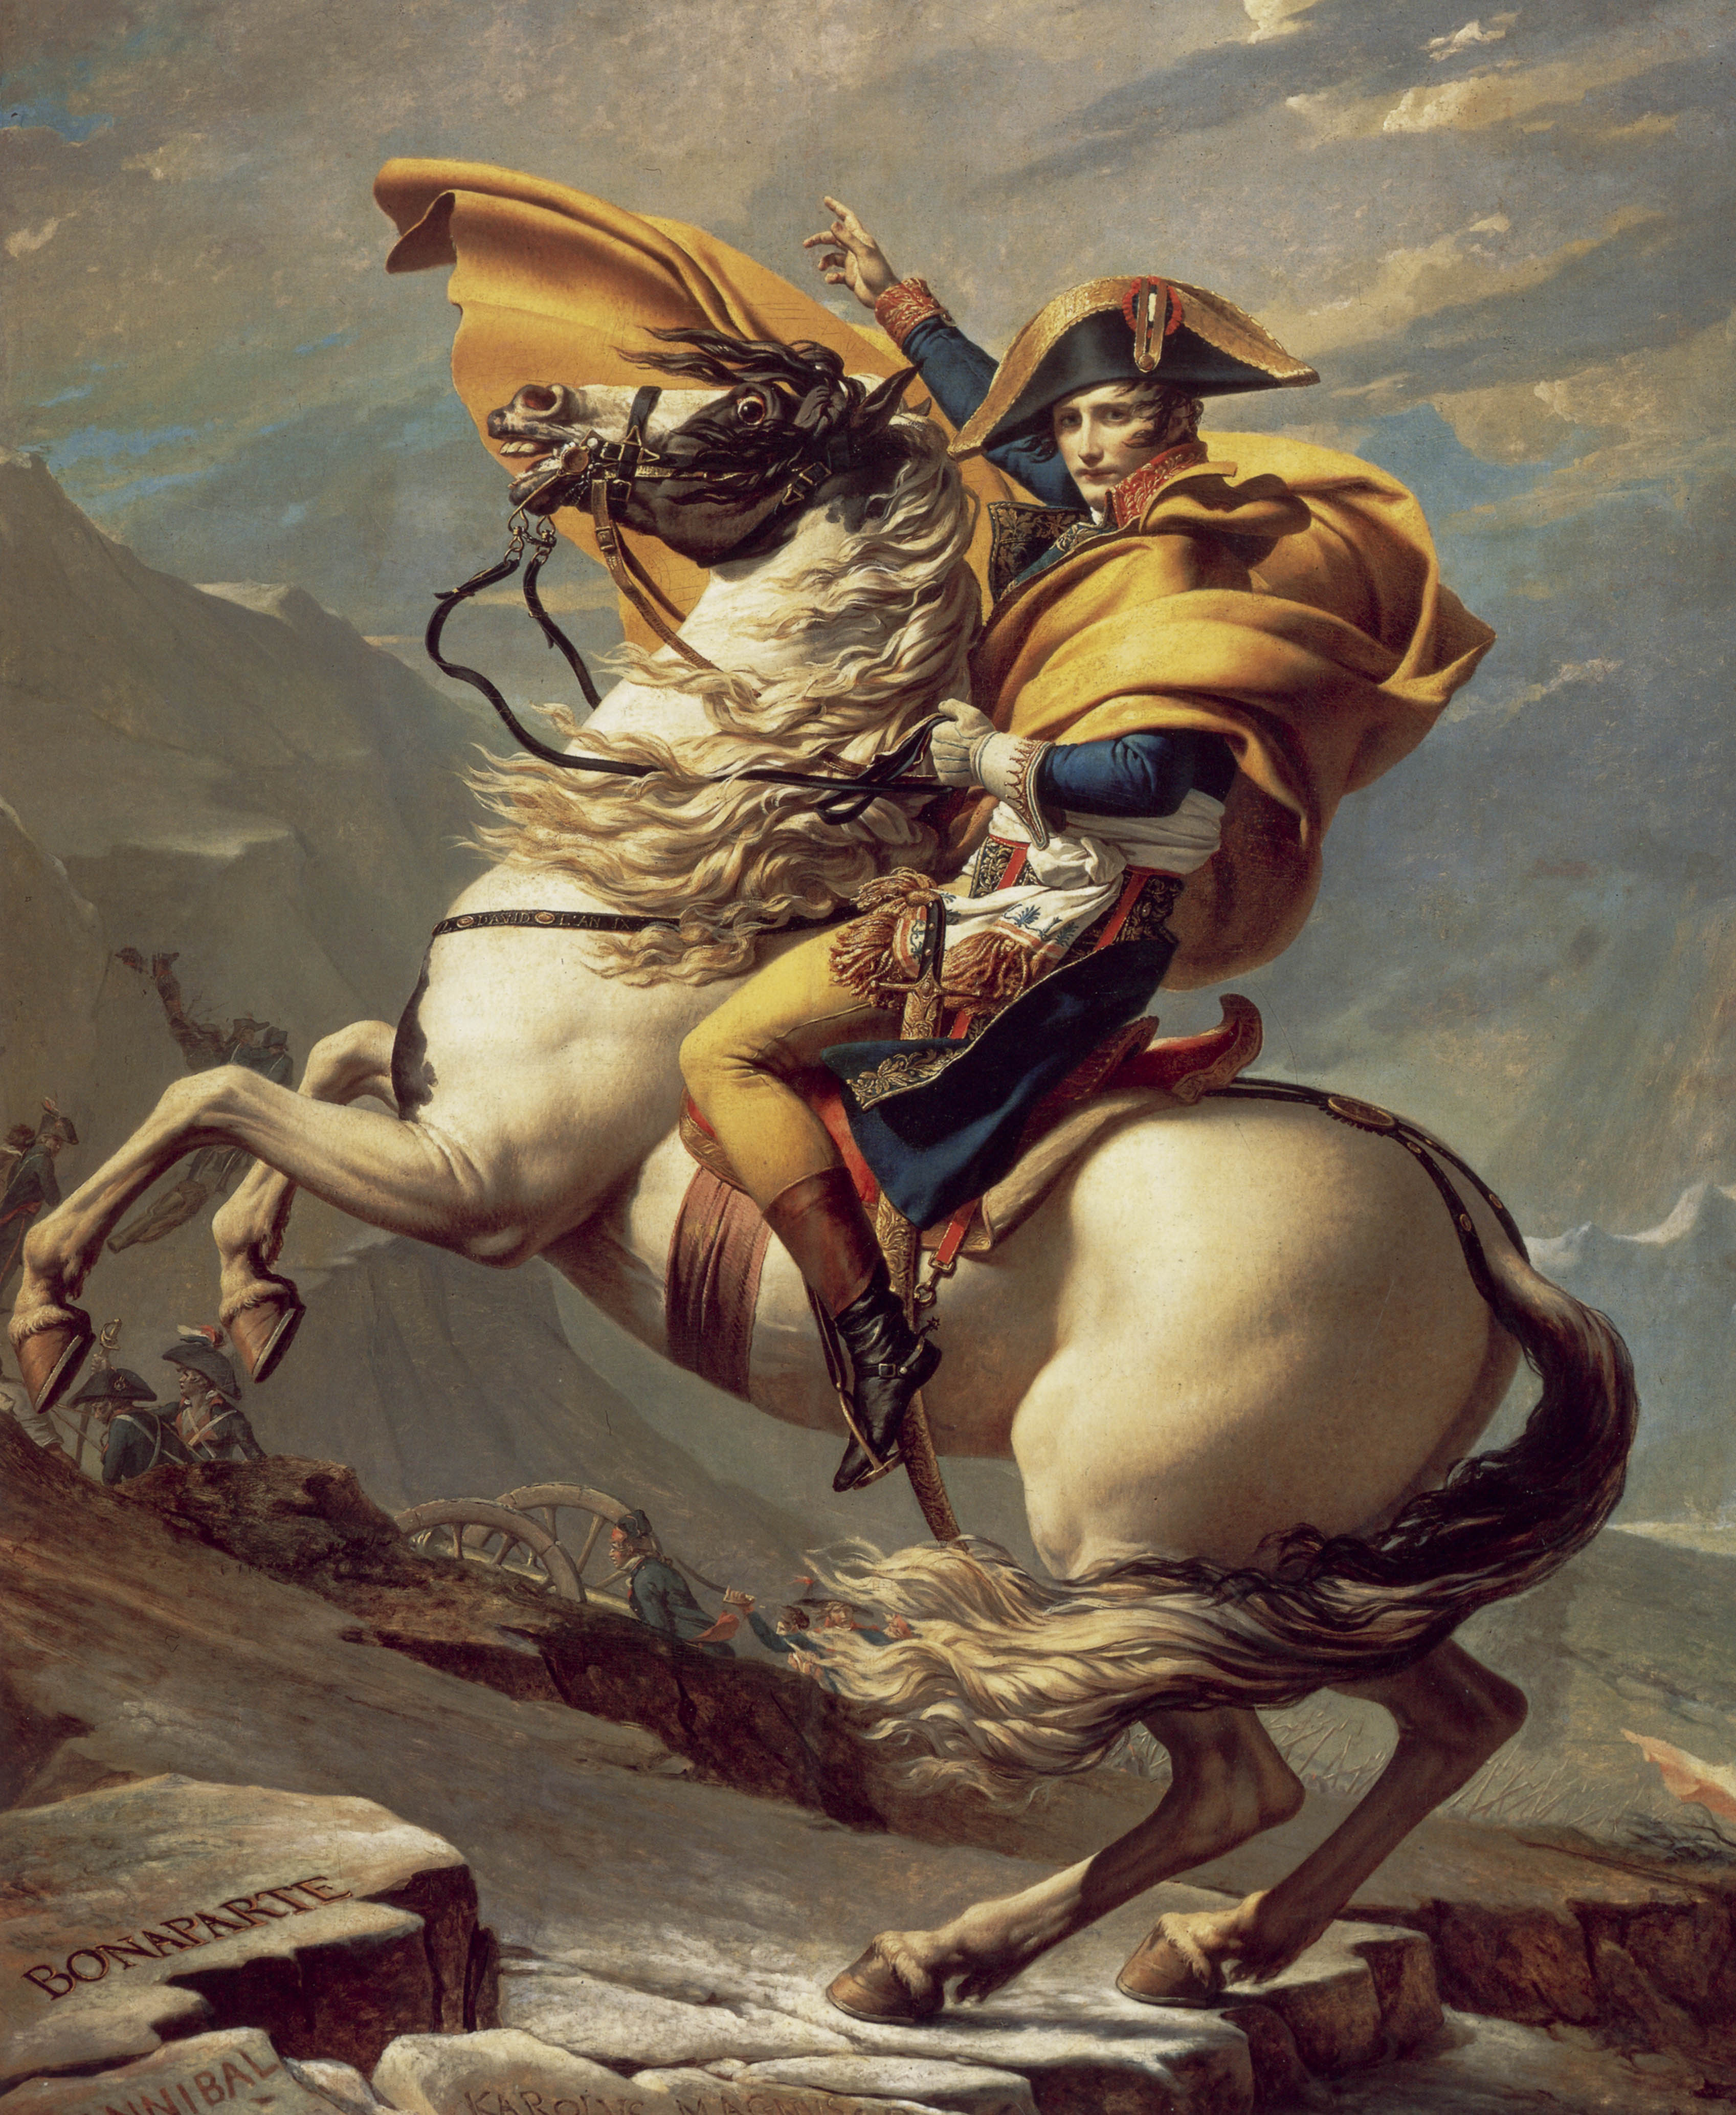 MyFrenchLife™ – MyFrenchLife.org – Napoleon: a tale of life and death - the unkindest cut